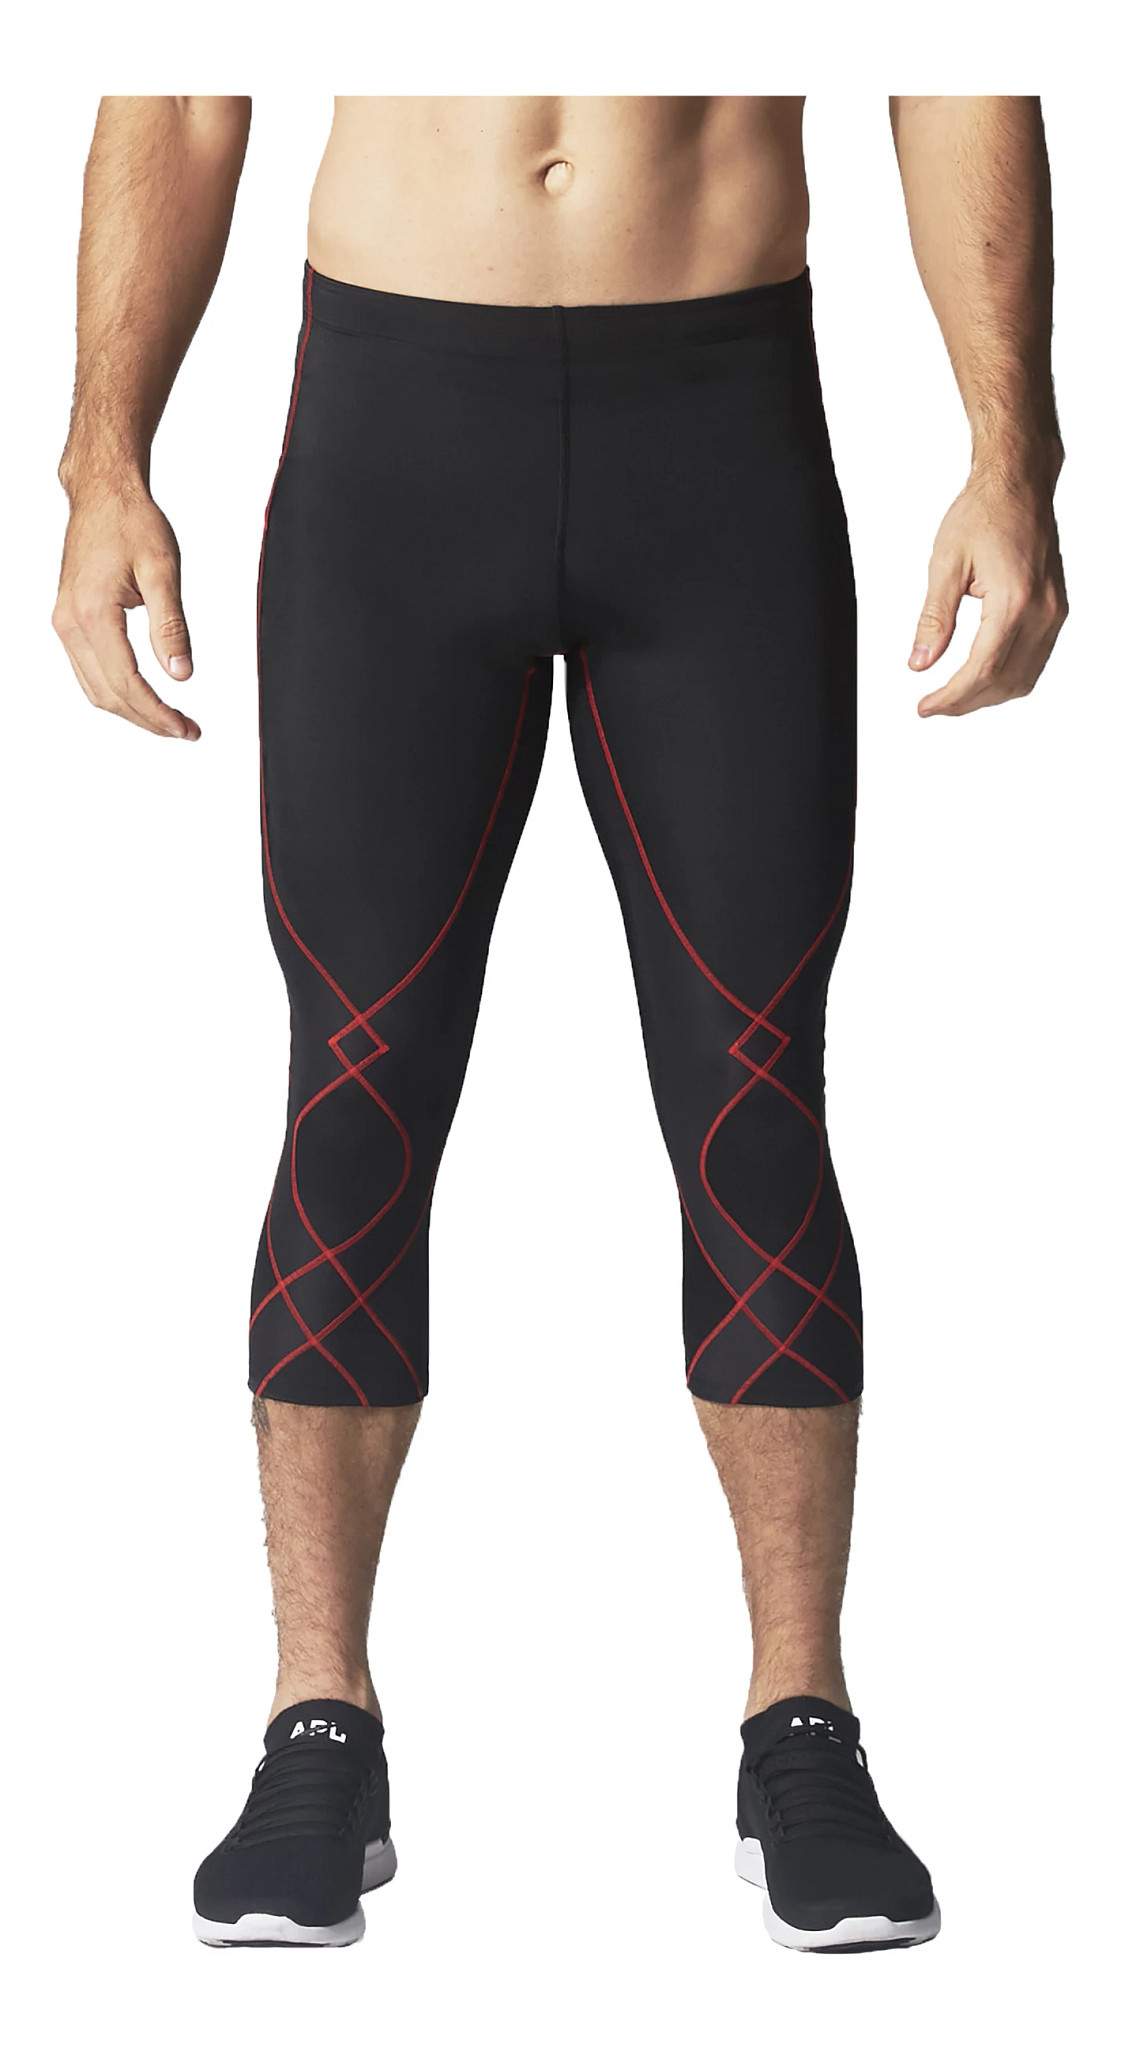 CW-X Men's Stabilyx Joint Support Compression Sports Tights, True